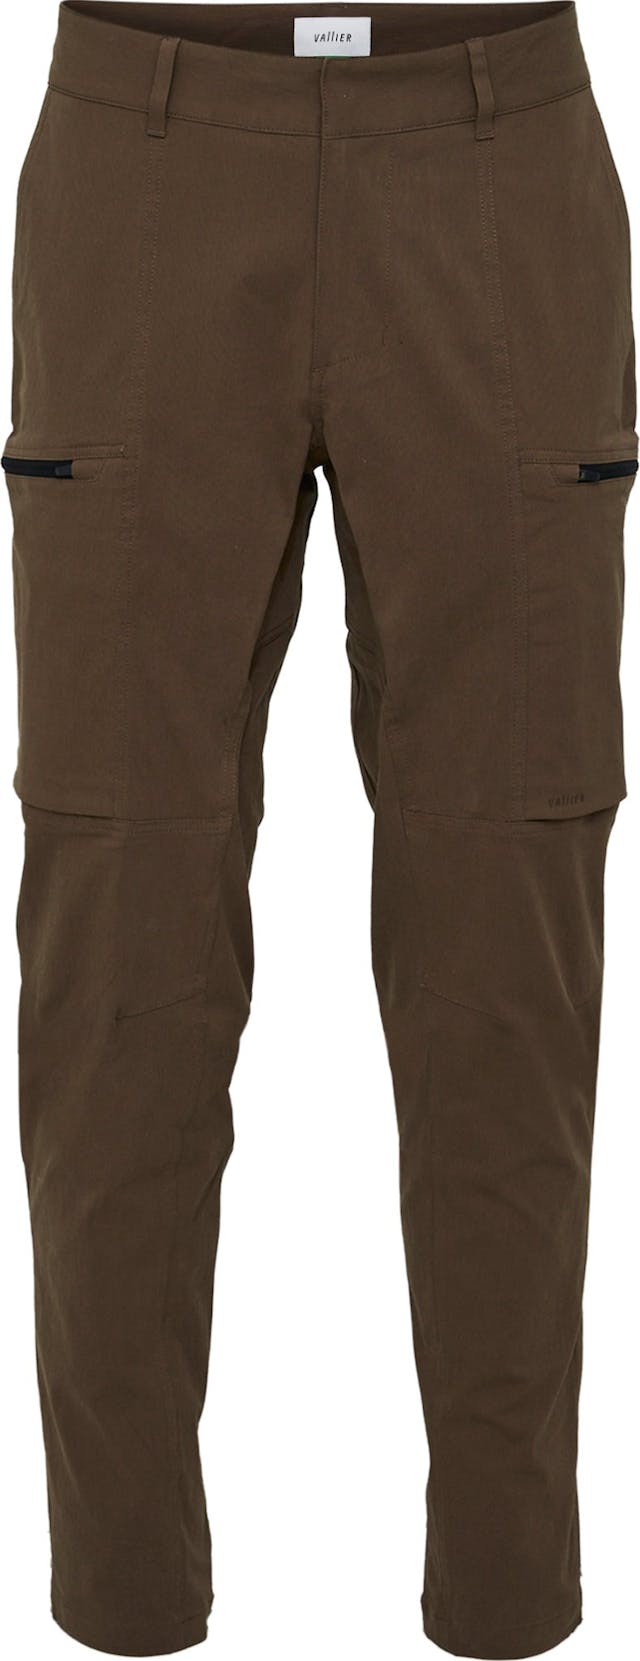 Product image for Jongno Cargo Pant - Men's